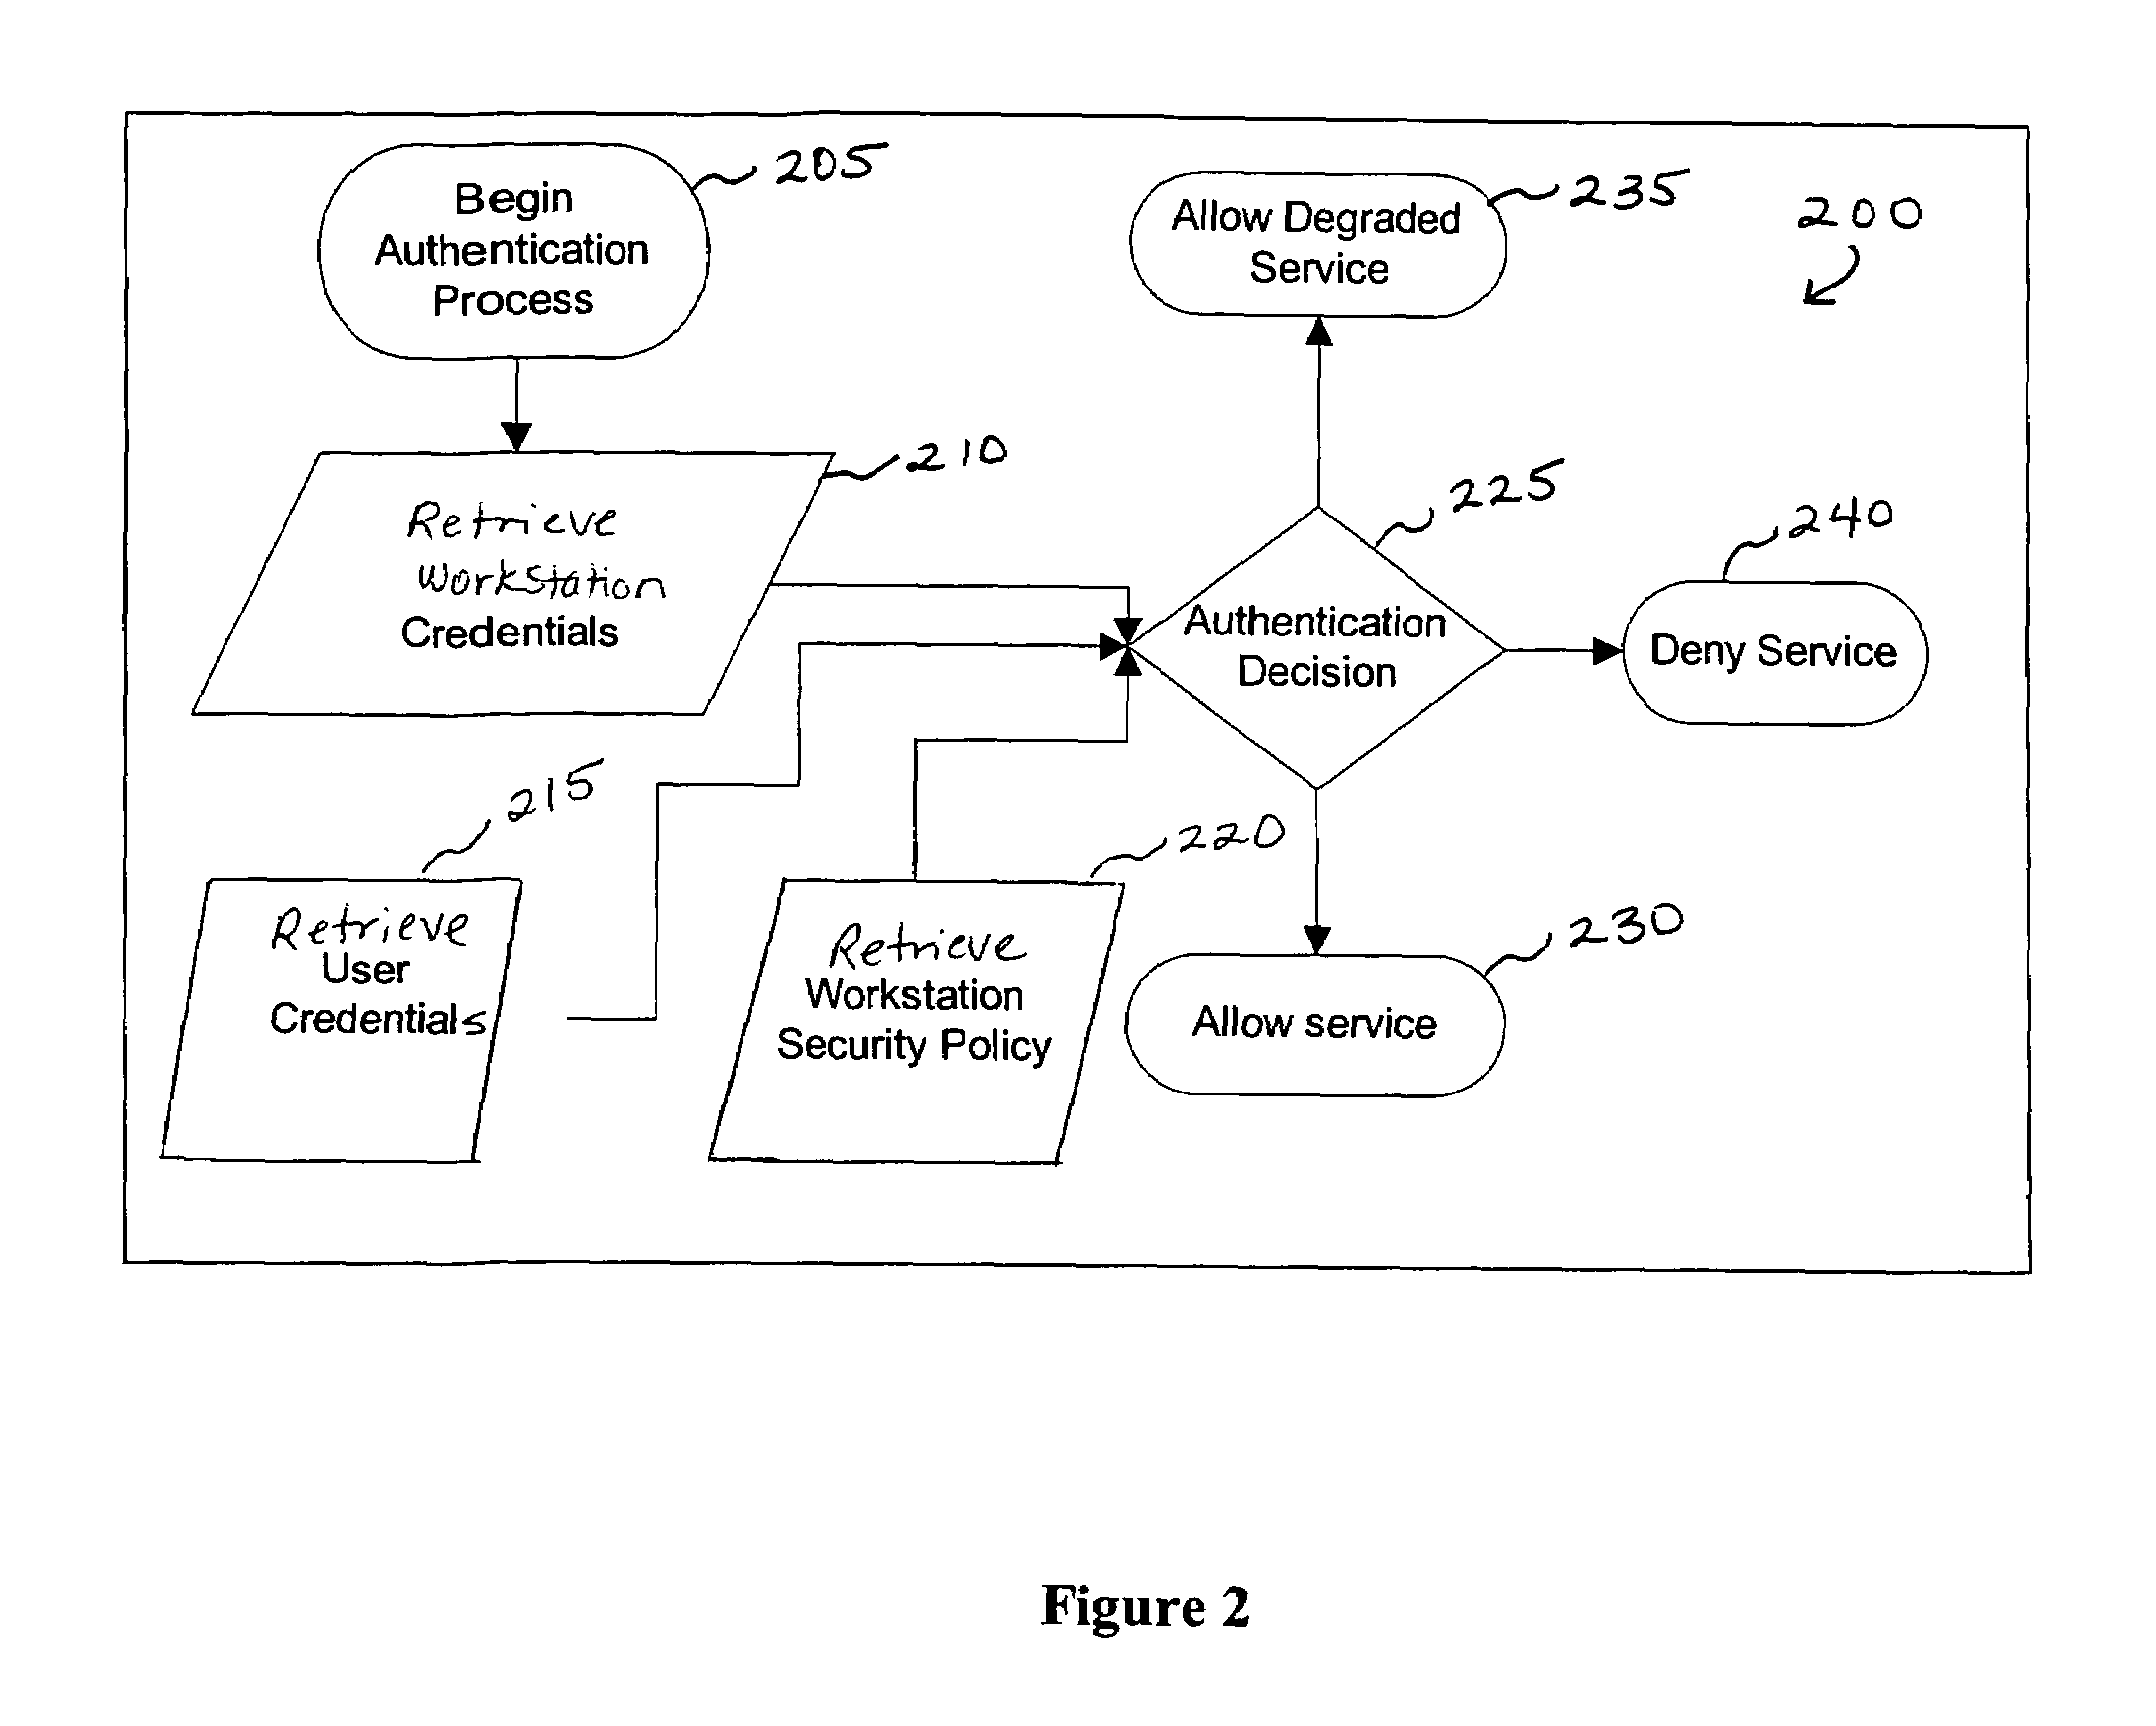 Method and apparatus for network assessment and authentication